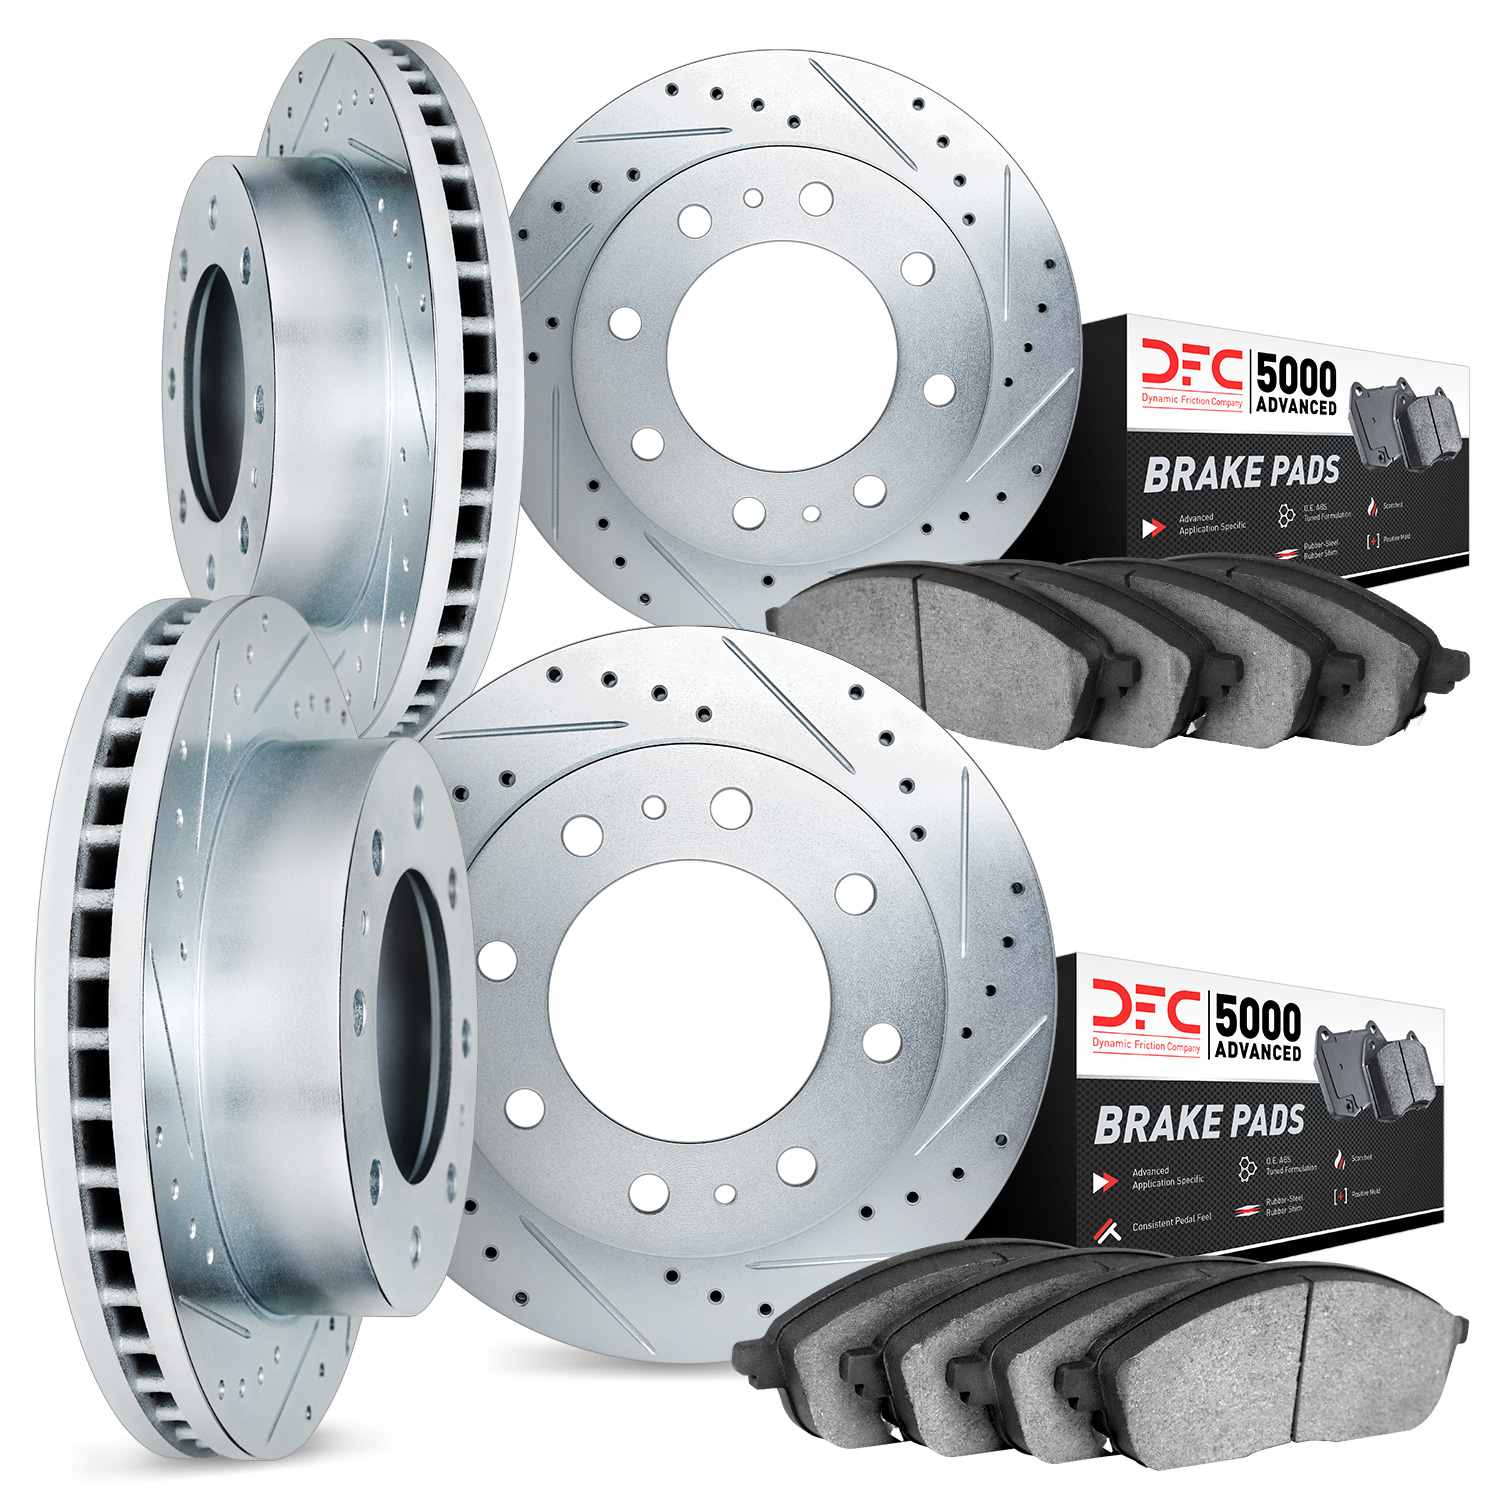 7504-48026 Drilled/Slotted Brake Rotors w/5000 Advanced Brake Pads Kit [Silver], 2001-2010 GM, Position: Front and Rear